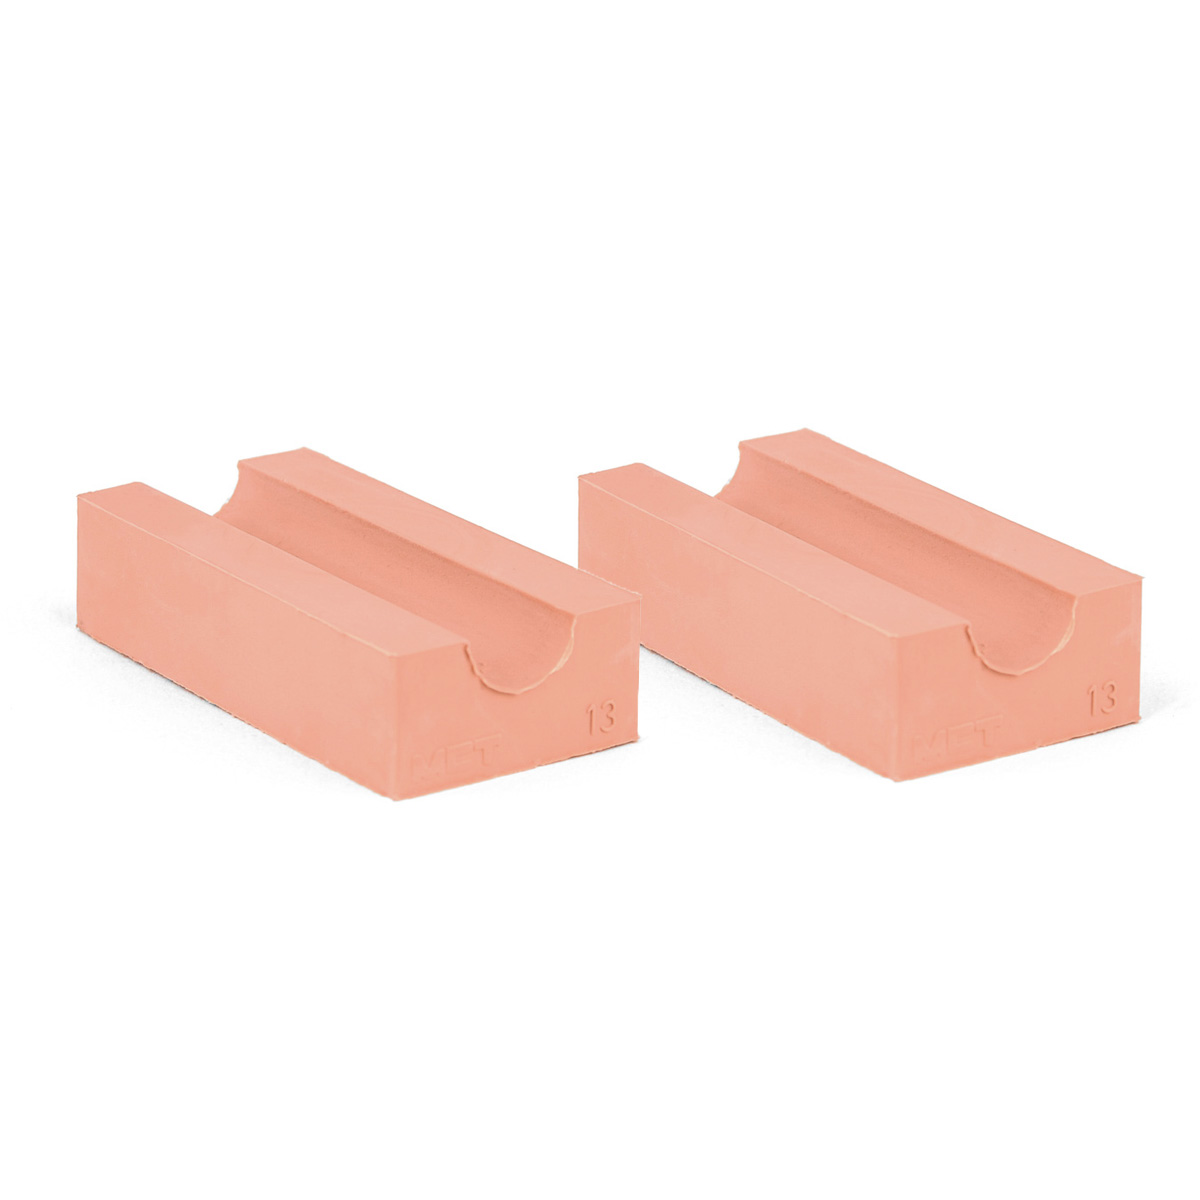 30-13*2 Set of 2 half insert block lycron, 30-13 for cable/pipe diam. 12.5-13.5mm